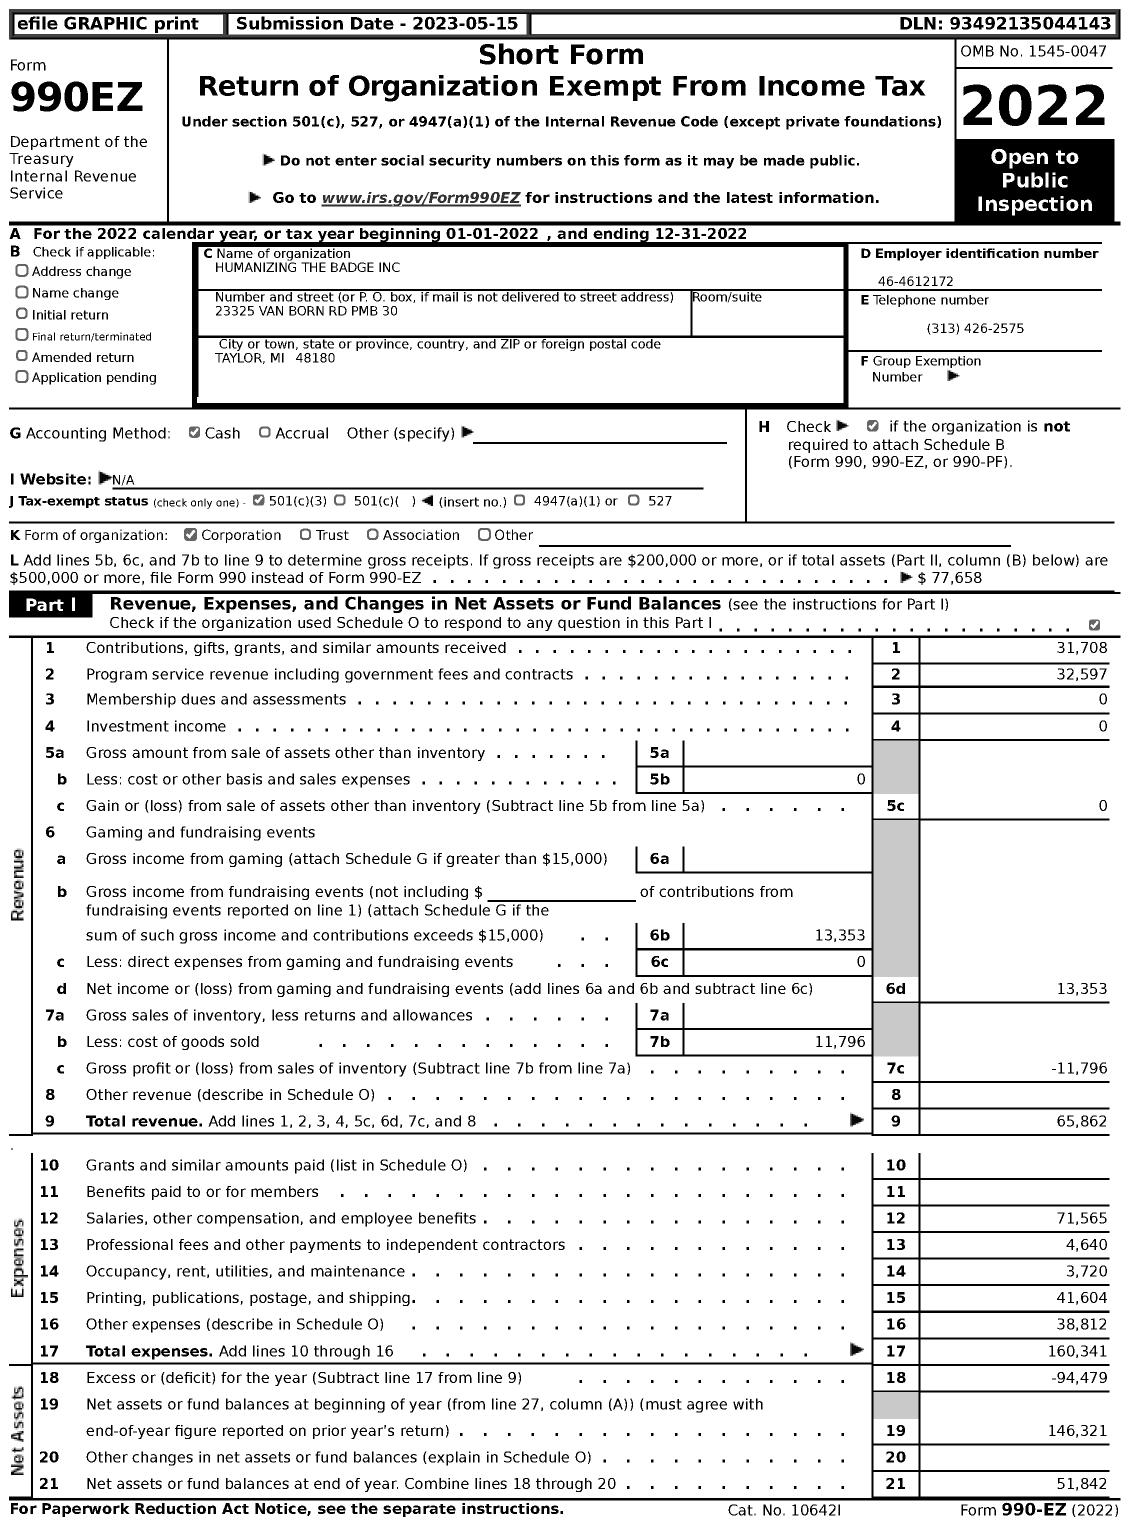 Image of first page of 2022 Form 990EZ for Humanizing the Badge